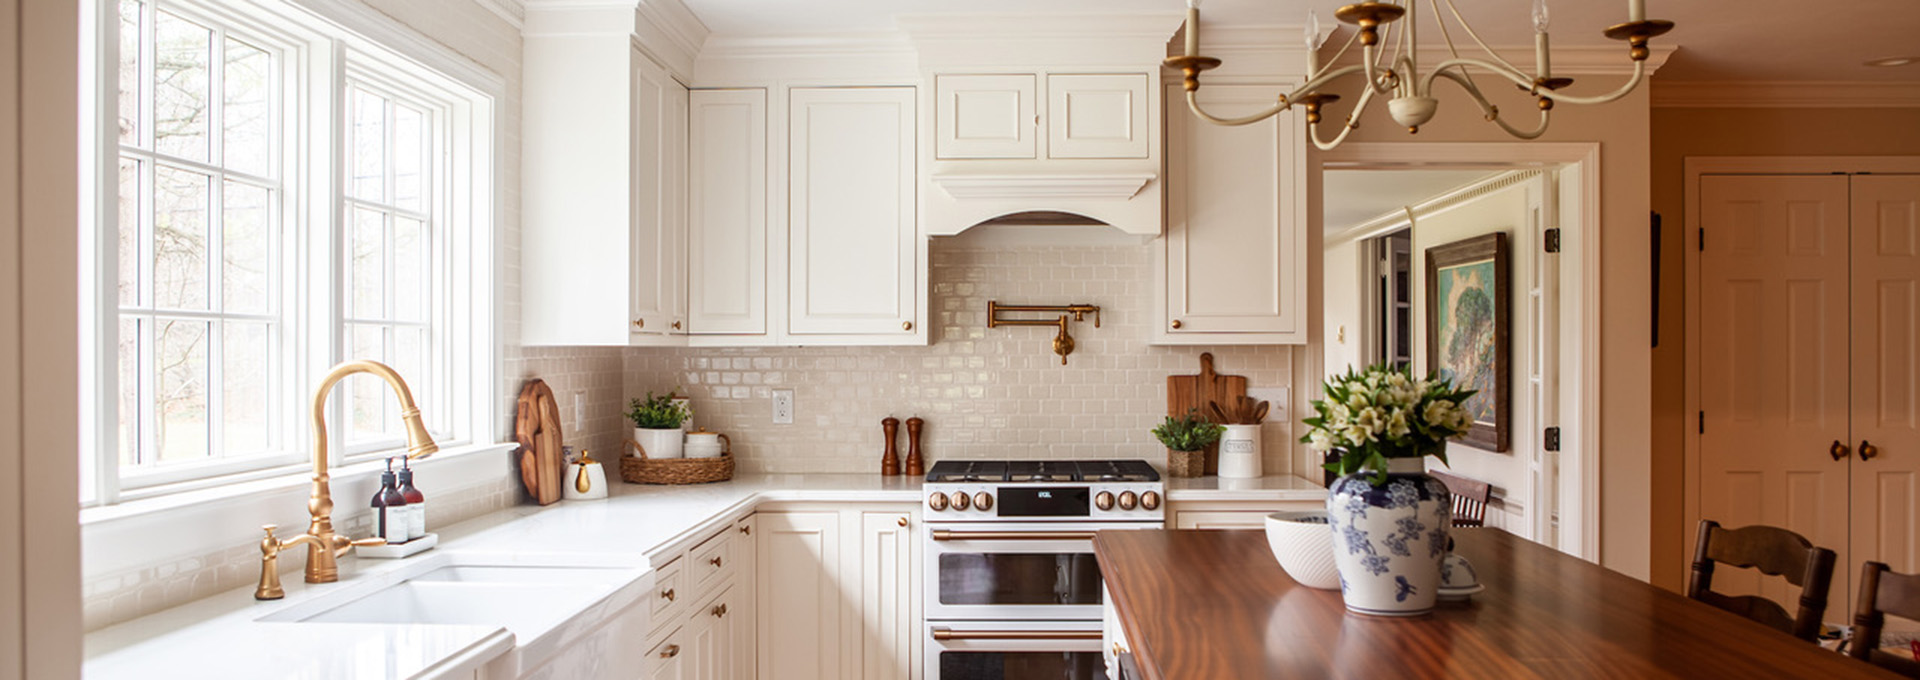 Syracuse Kitchen Cabinets and Countertops